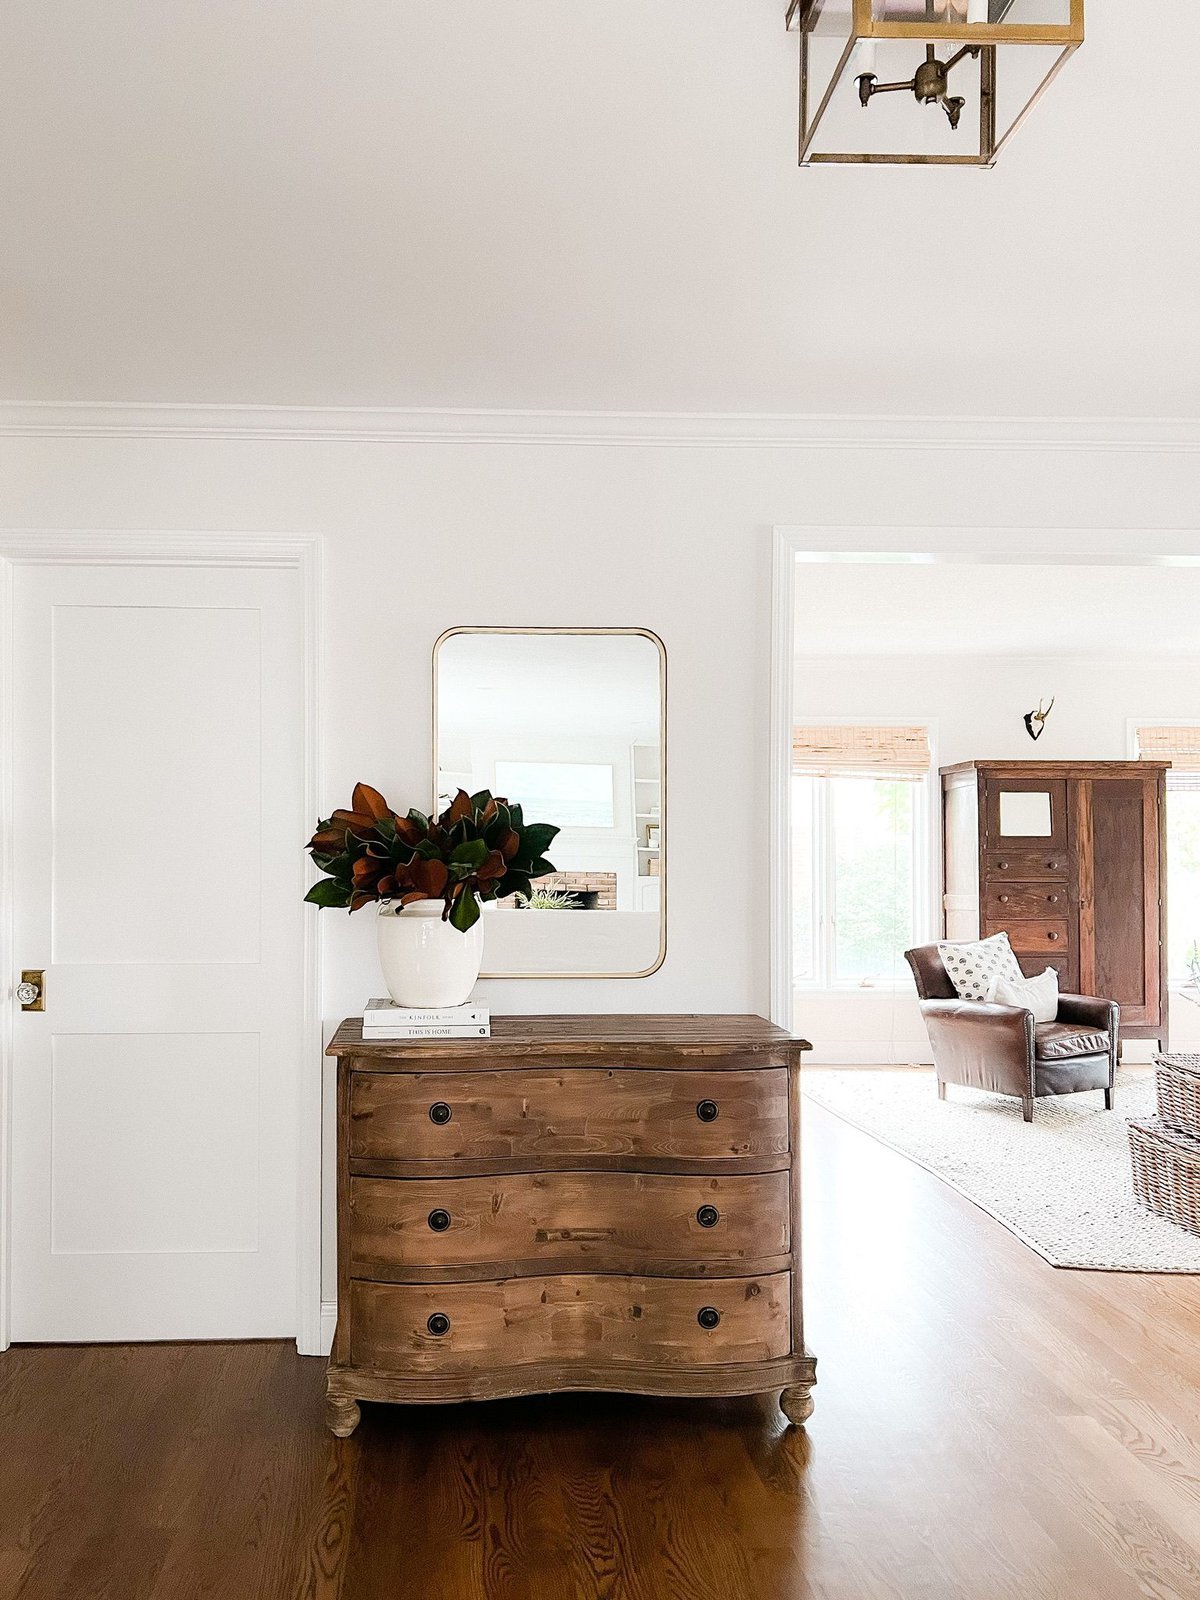 An entryway in a home with wood floors and a wood dresser with magnolia branches in a vase